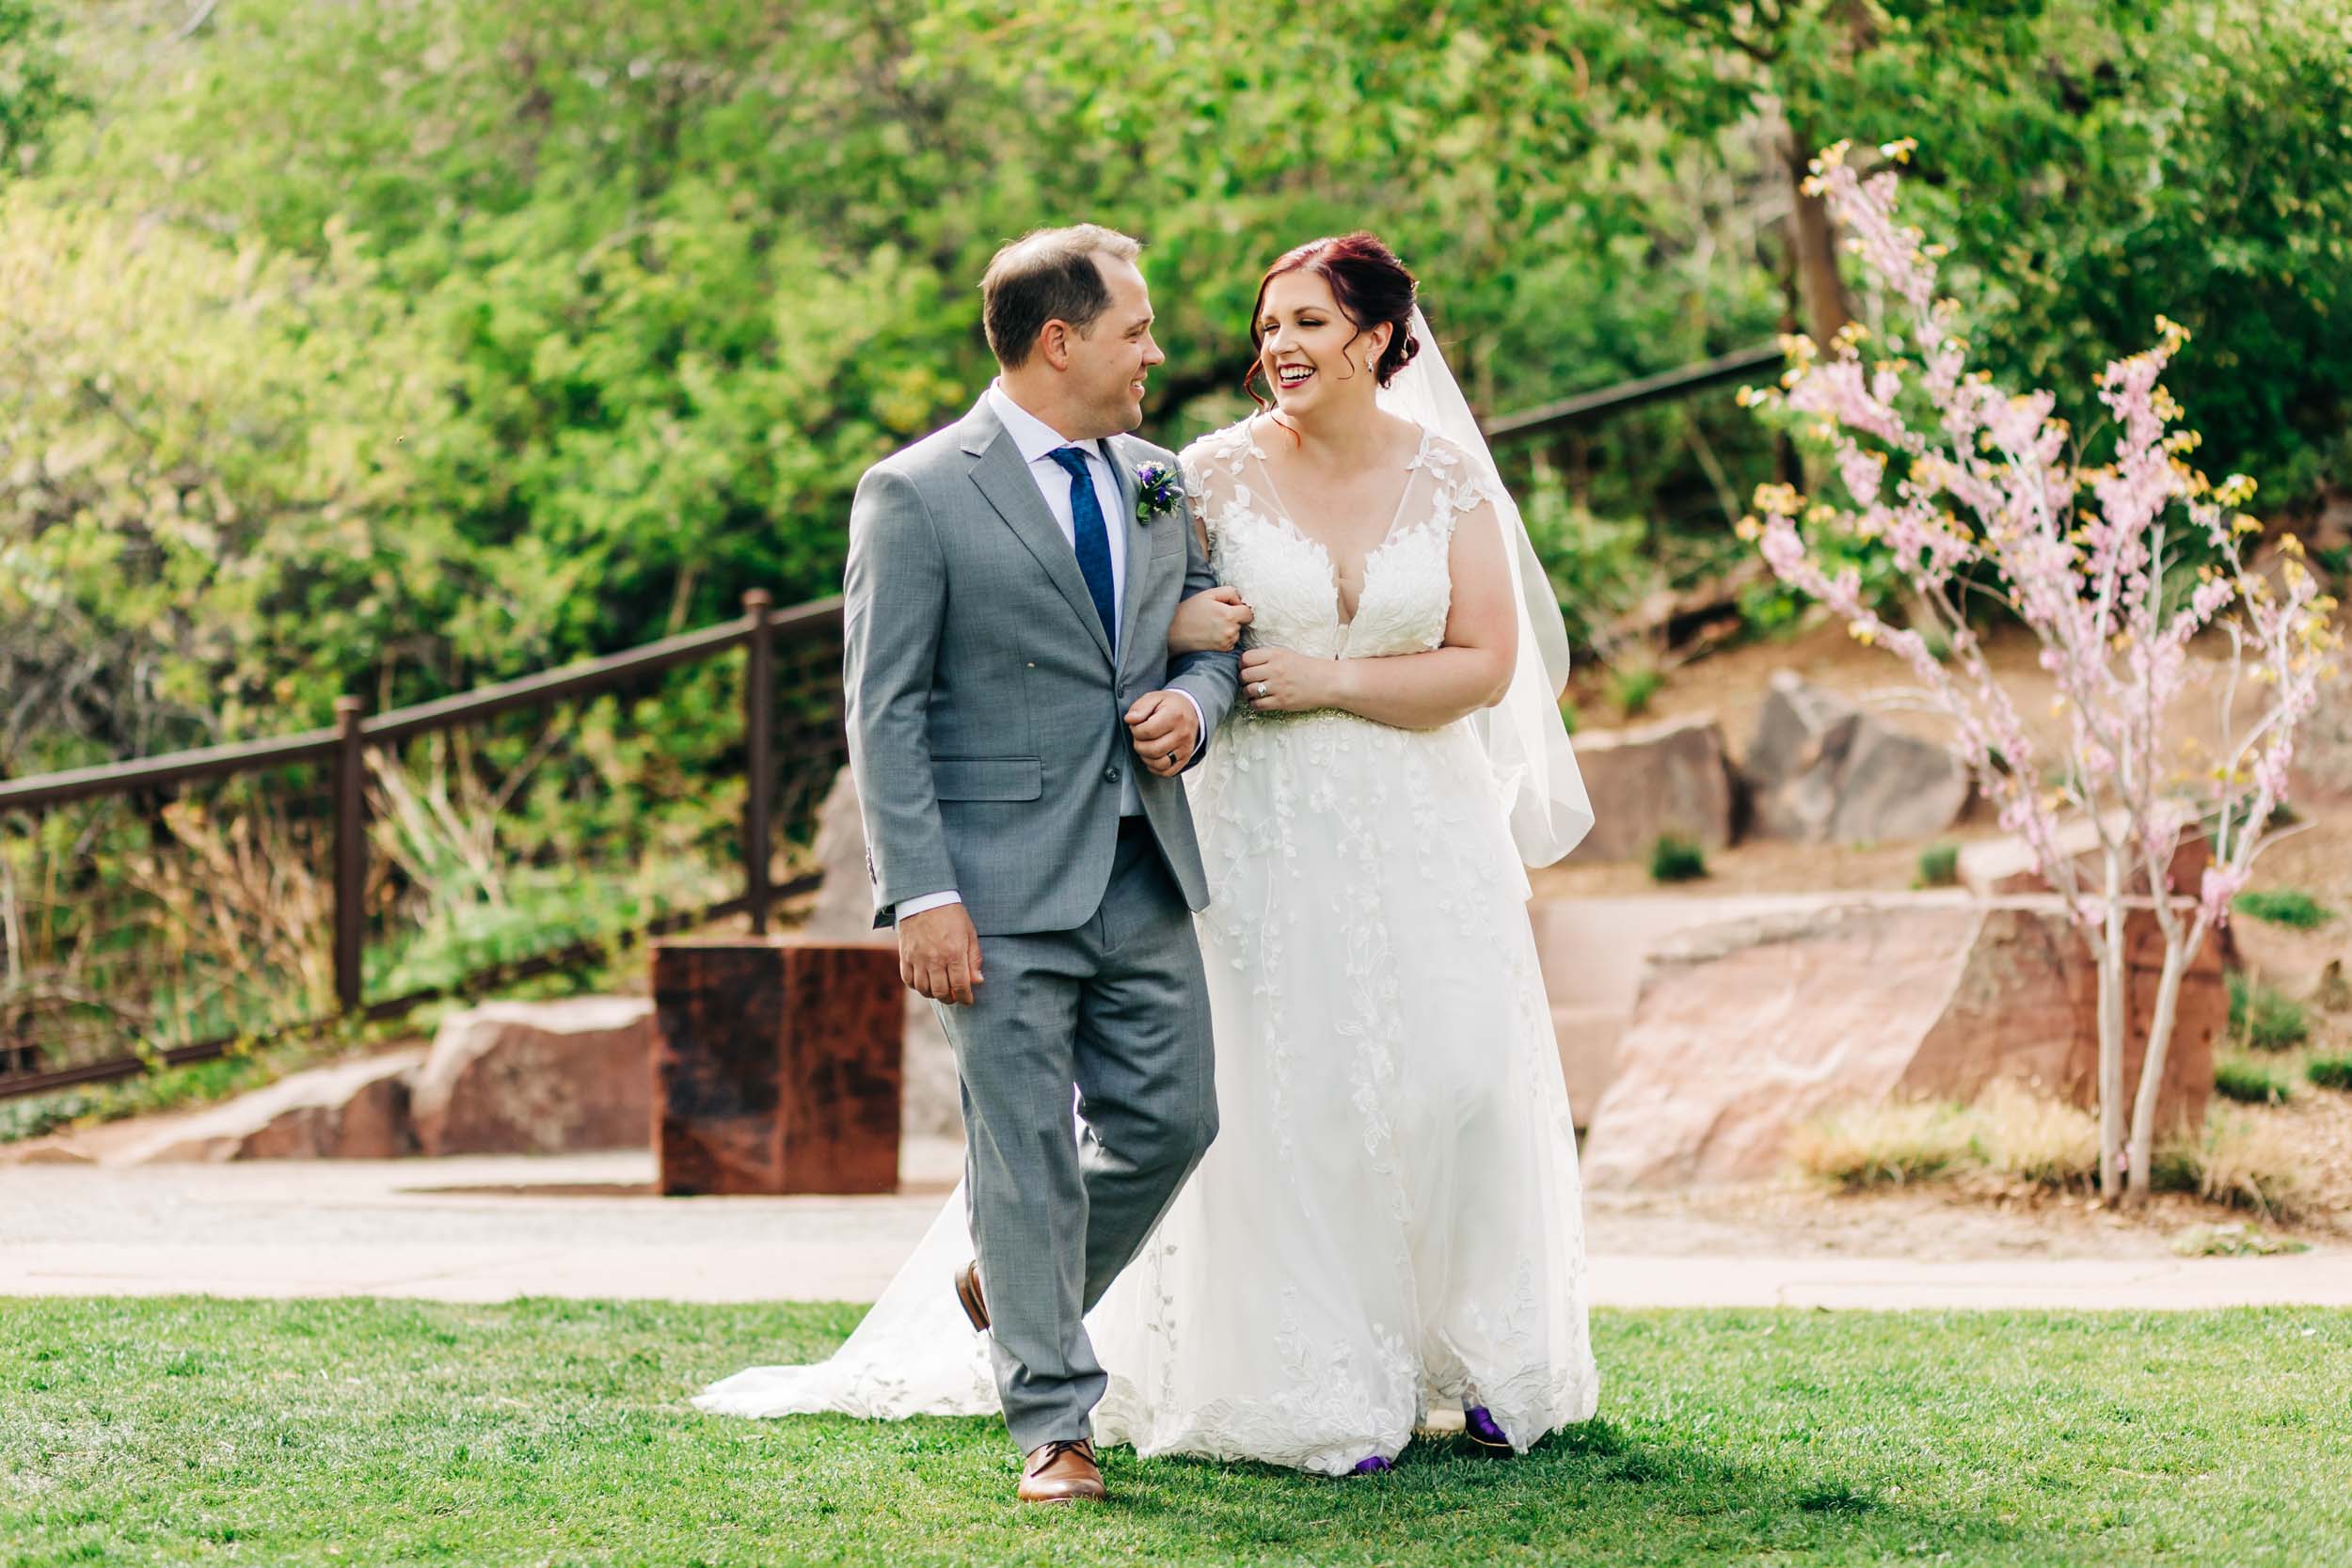 Red Rocks Trading Post wedding portraits of the bride and groom